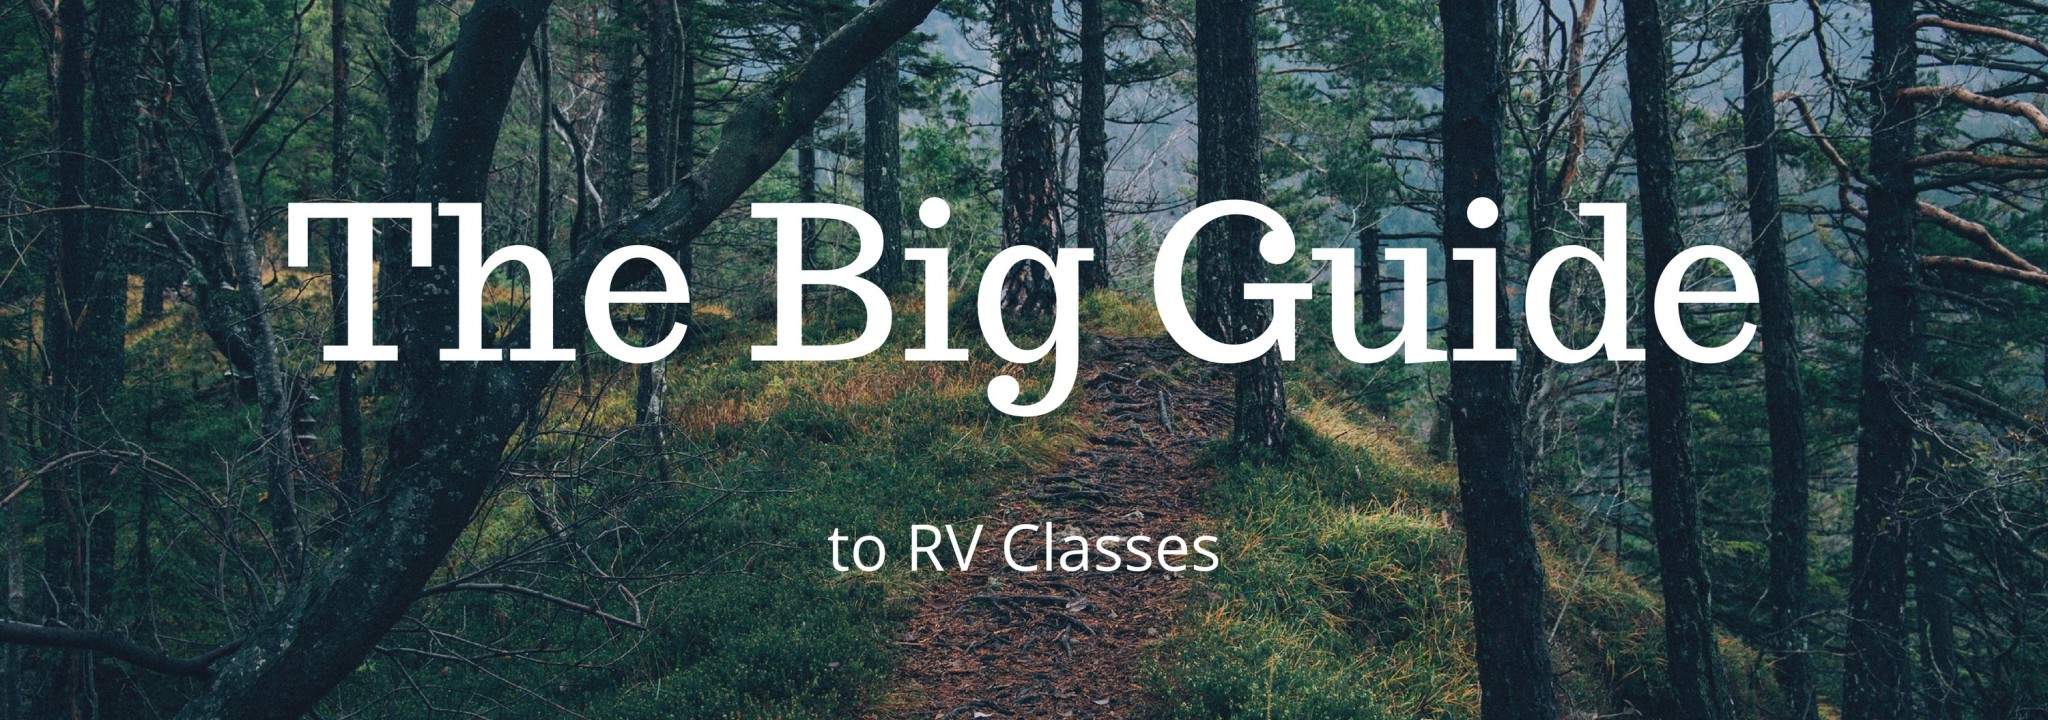 The big Outdoorsy guide to RV classes